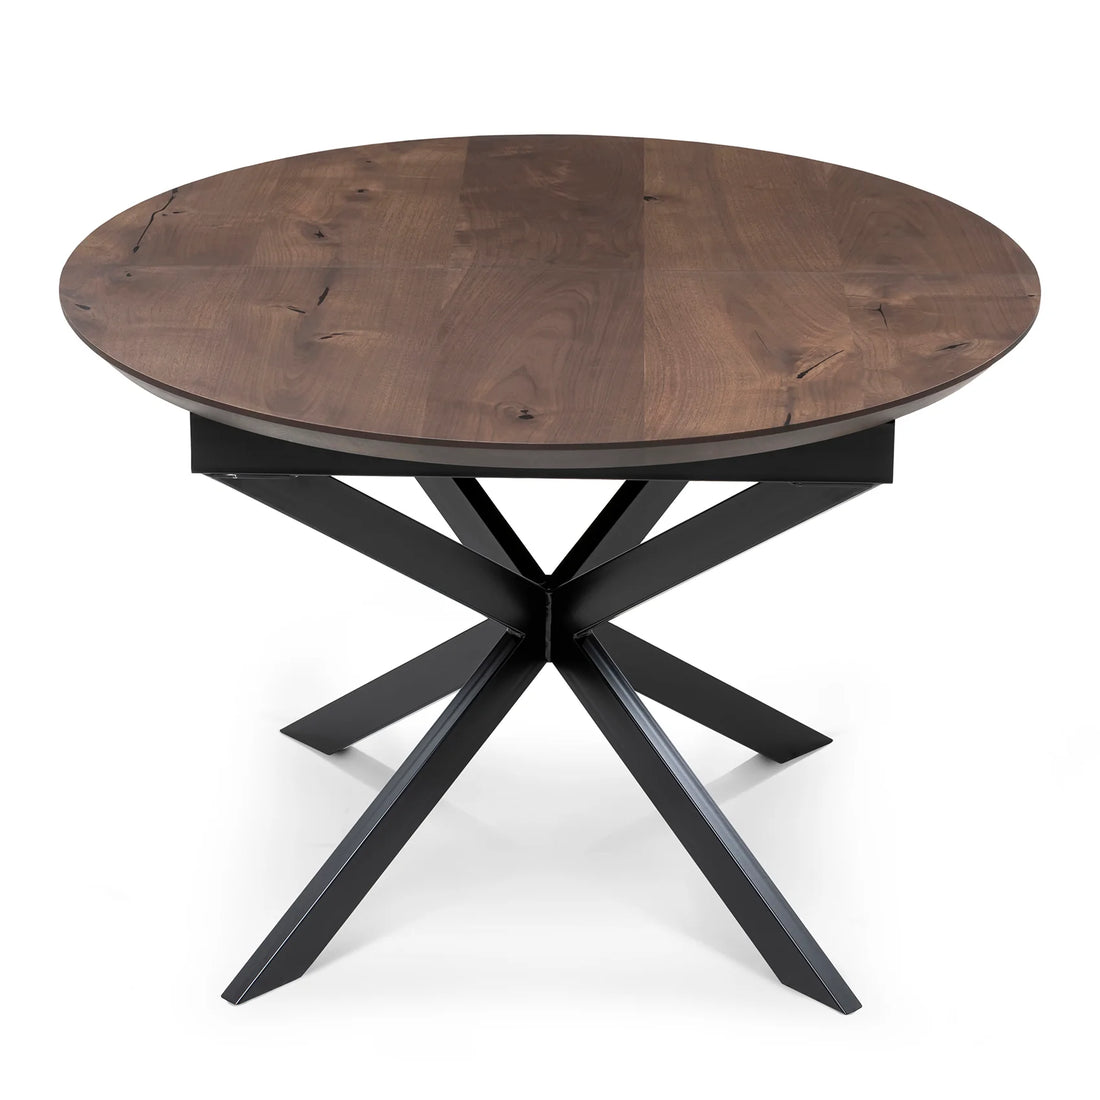 Round Chocolate Walnut Dining Table Extendable 